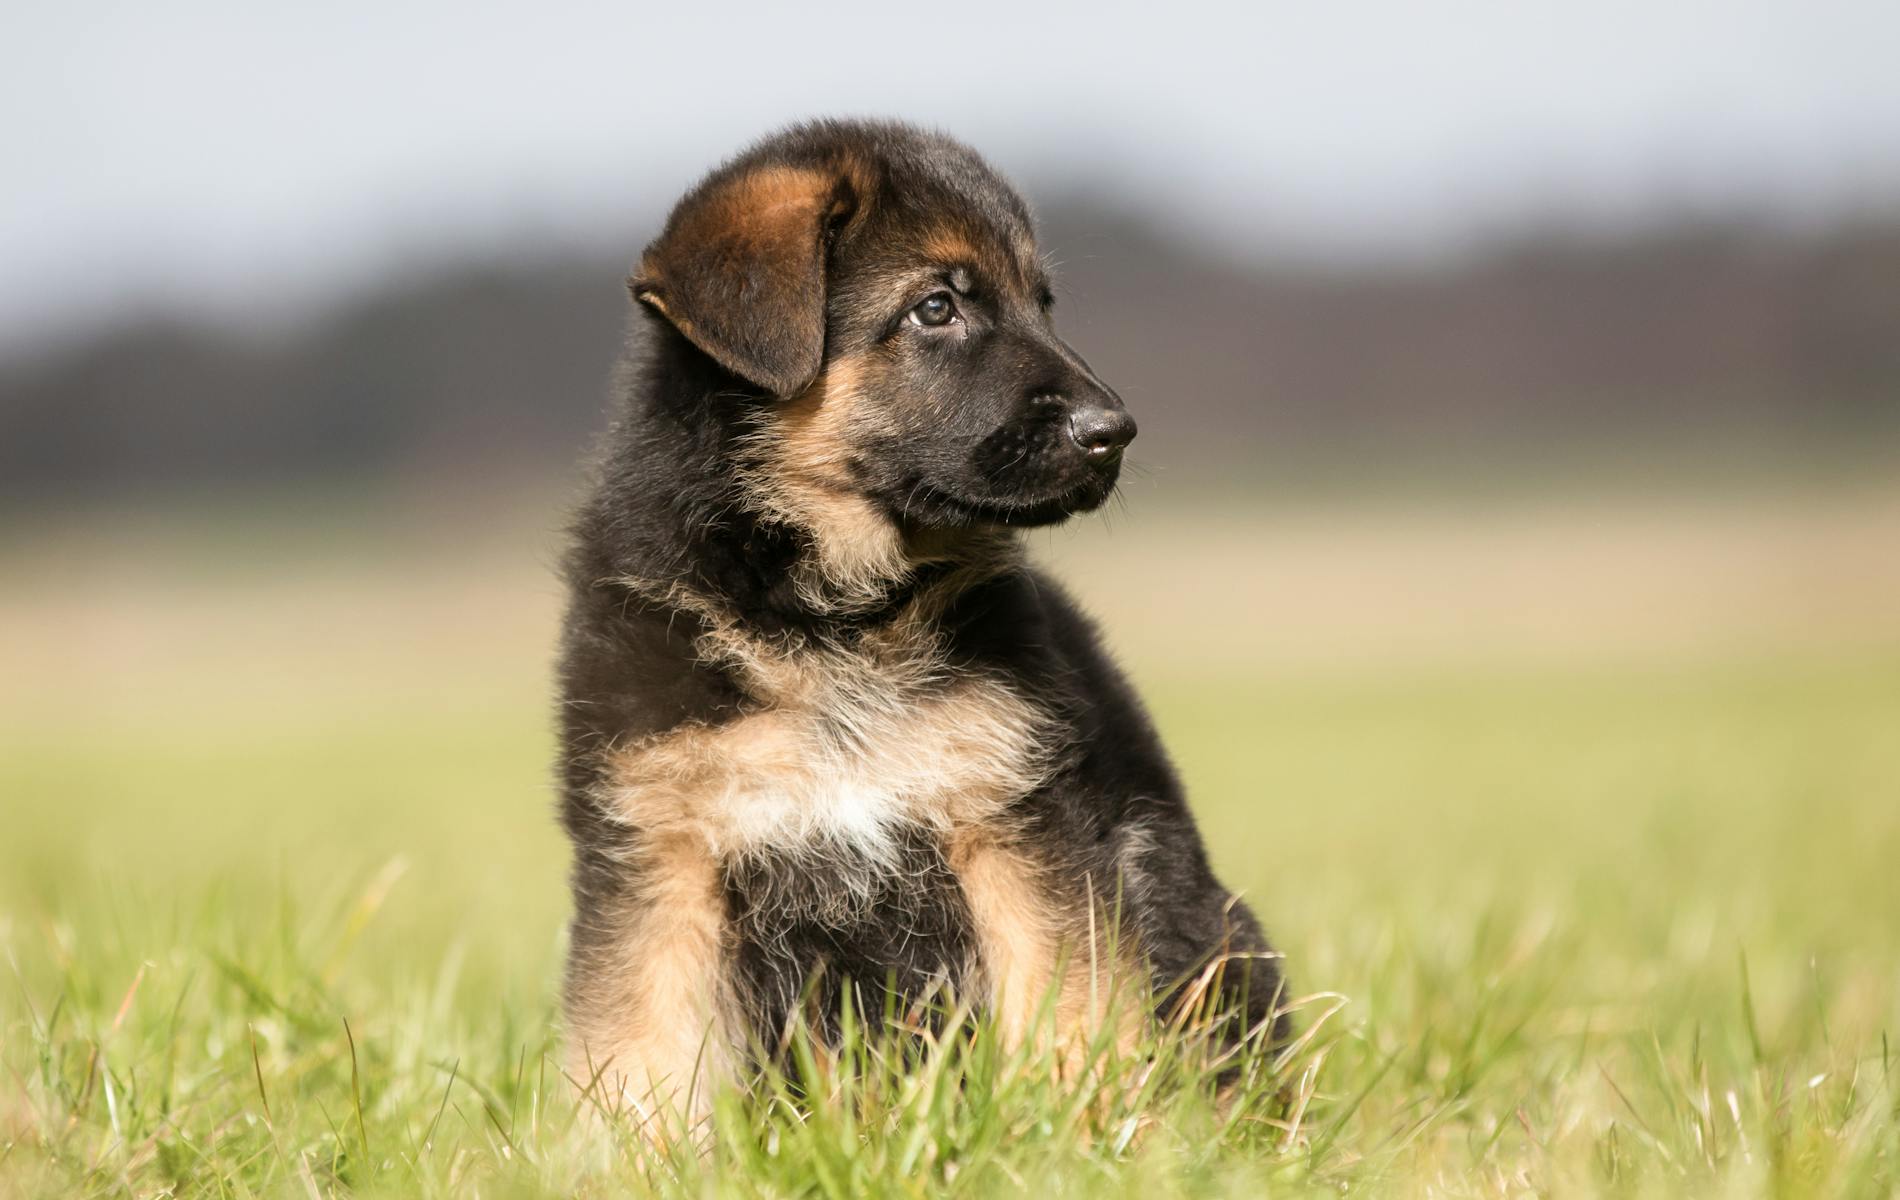 Puppy in field looking to the side